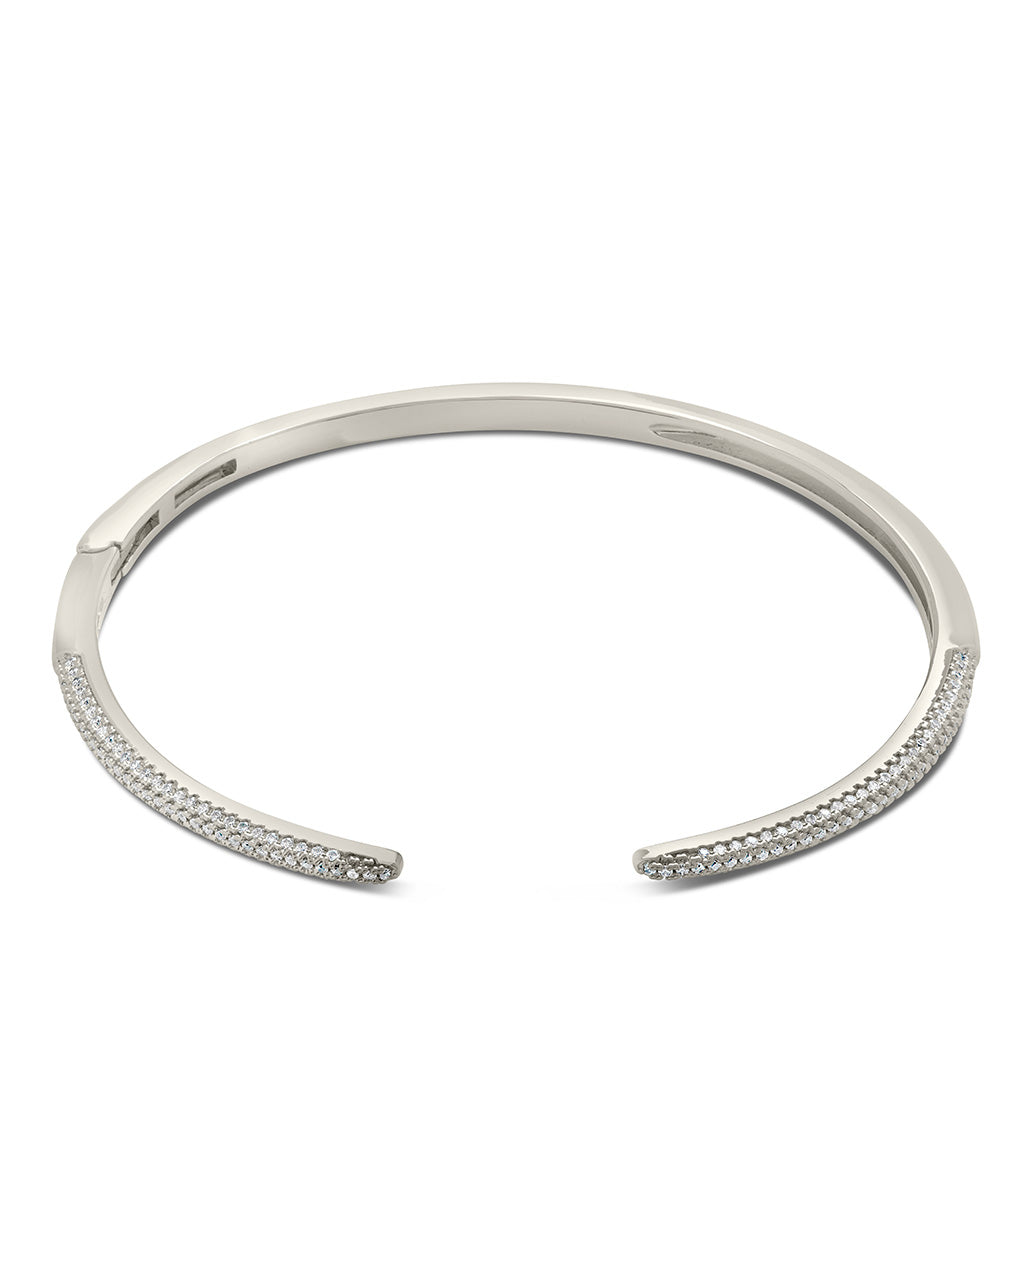 Sterling Silver Nail Cuff Bracelet with CZ Accents SBGB00241